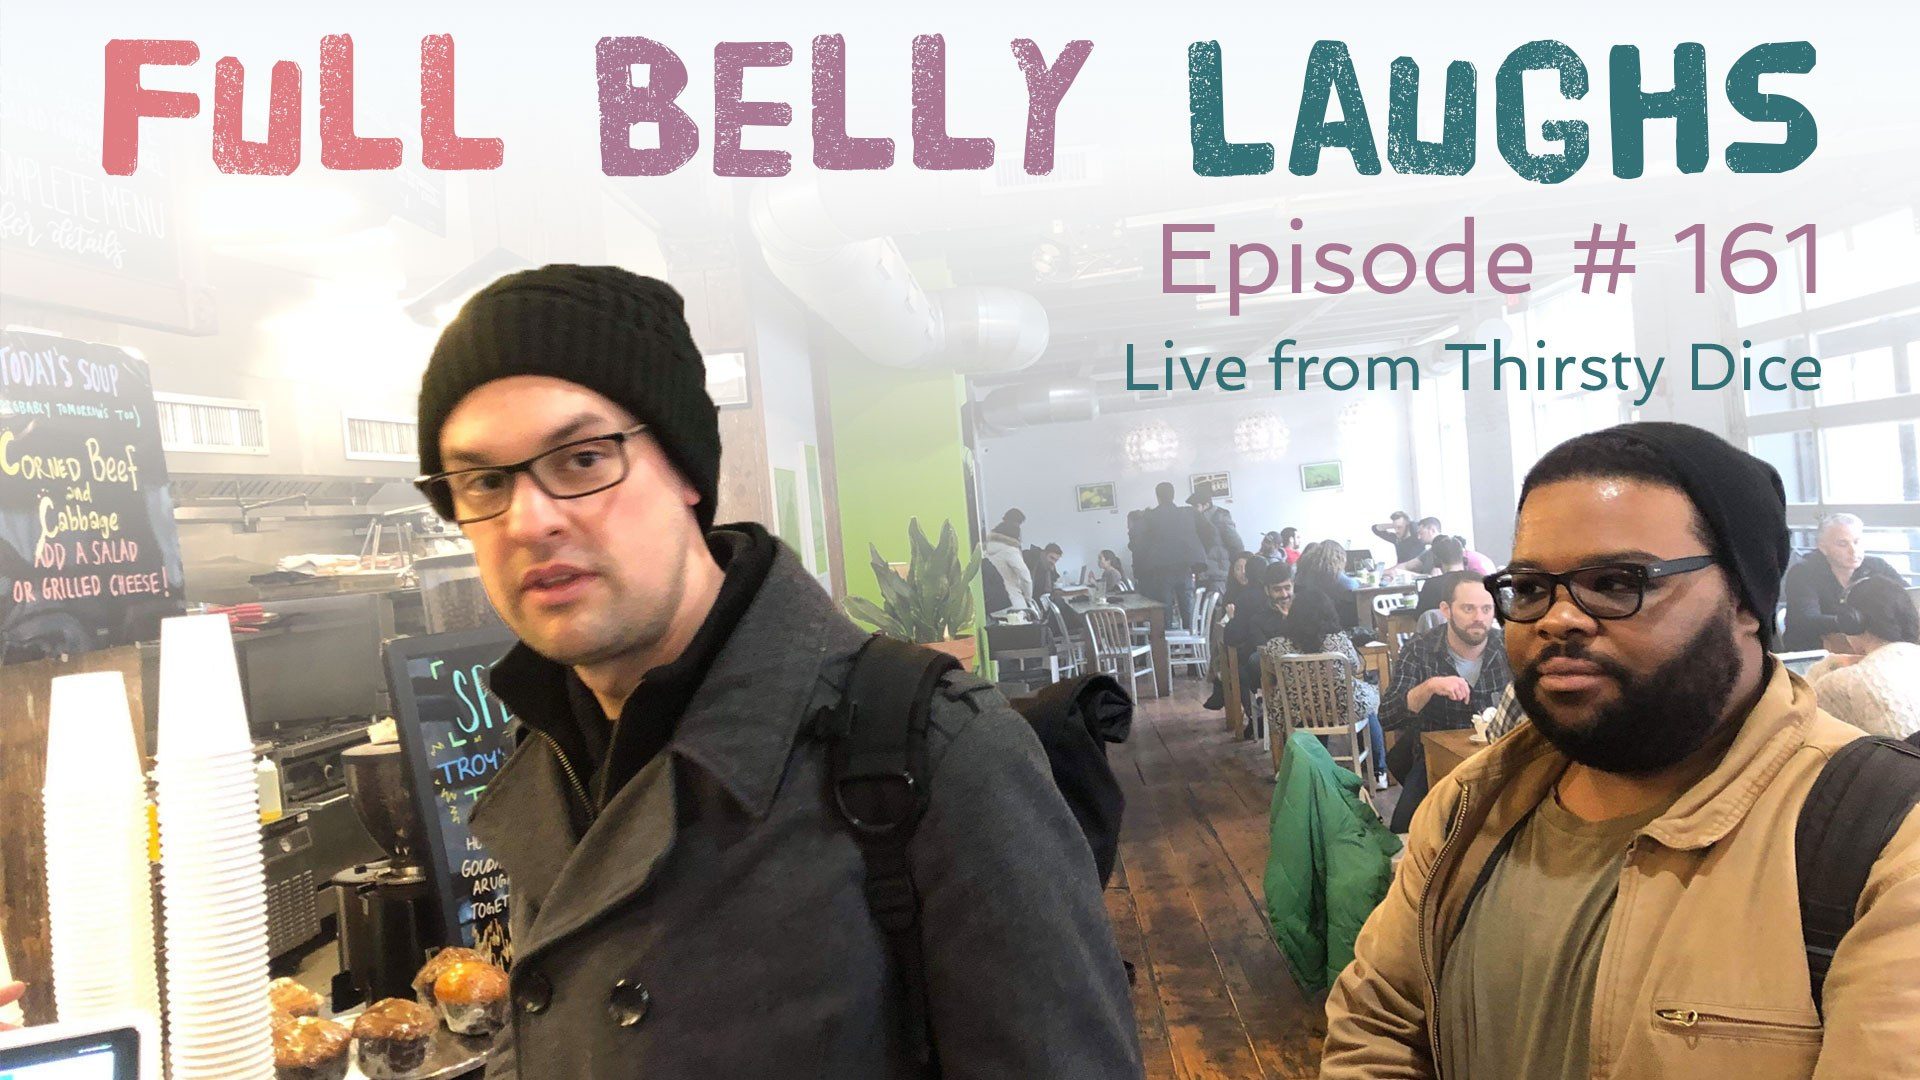 full belly laughs podcast episode 161 live from thirsty dice audio artwork